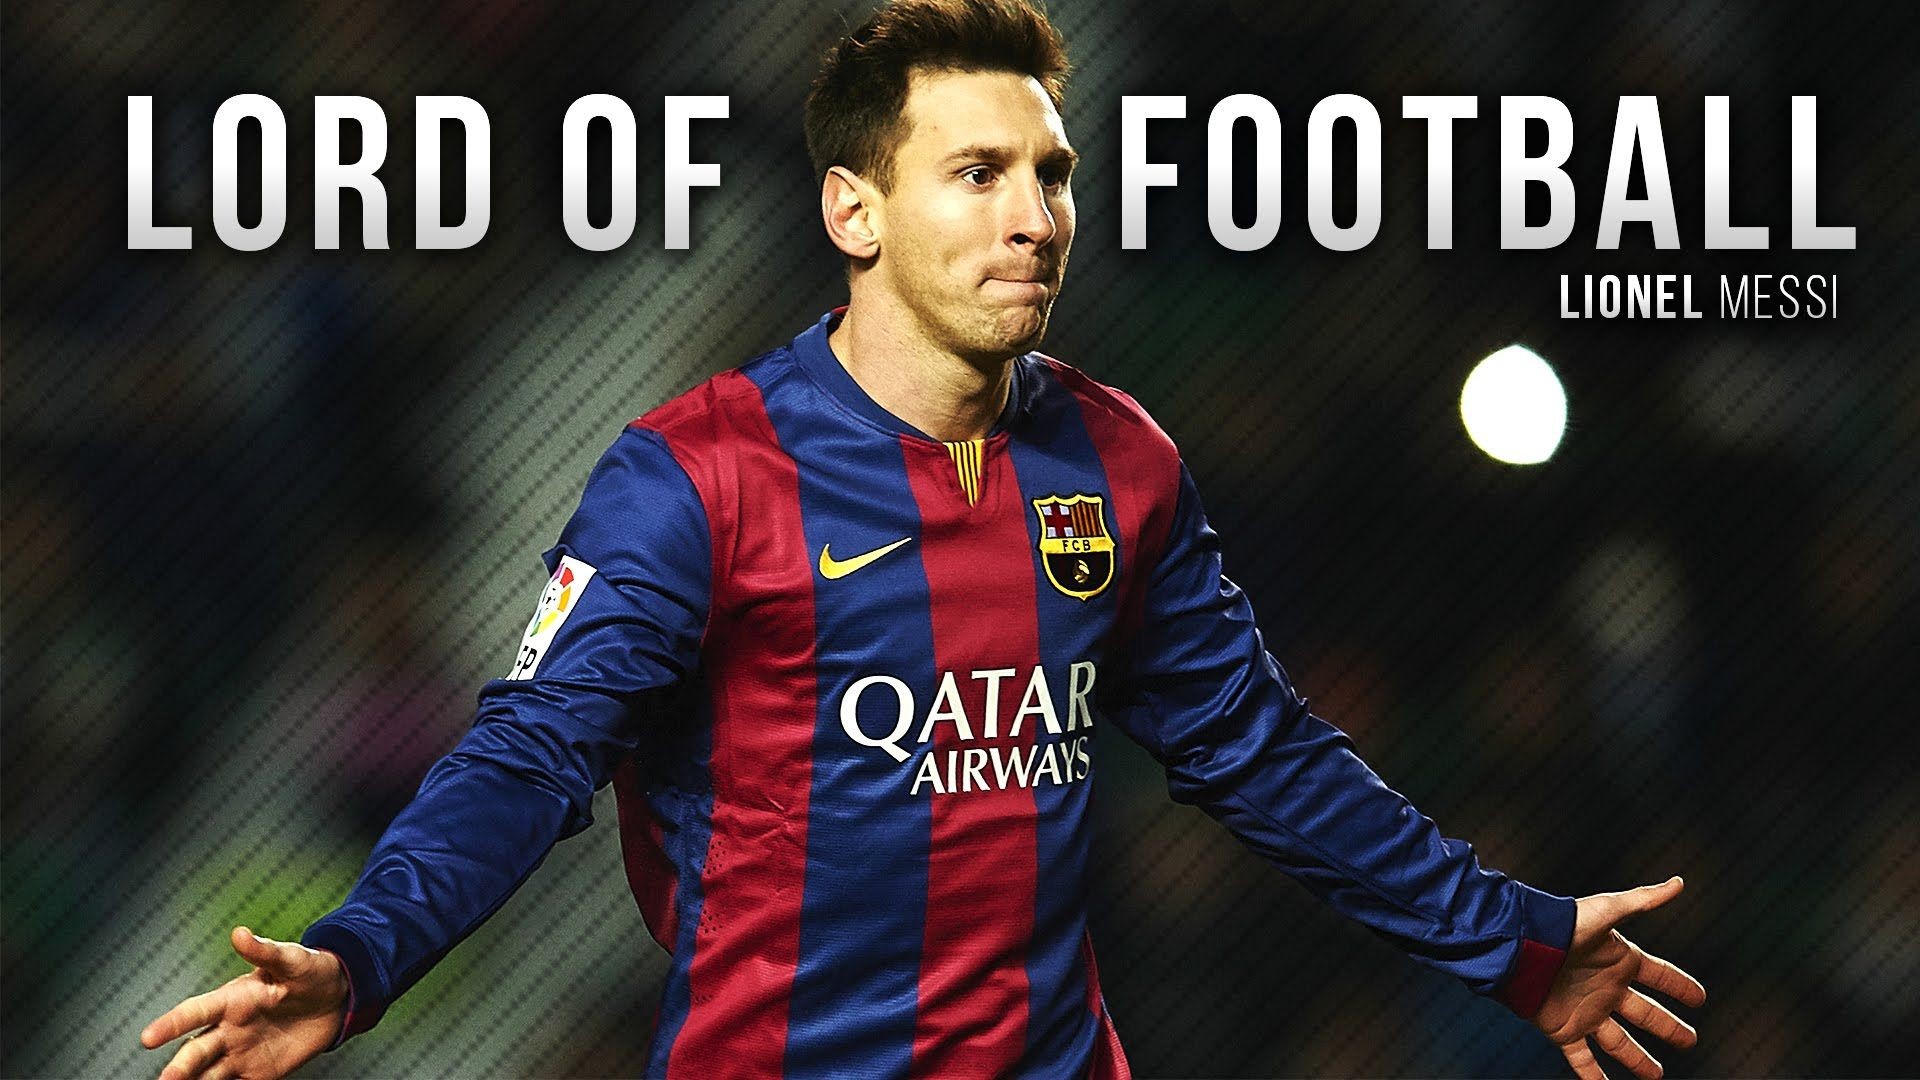 Lionel Messi Wallpapers HD lionel